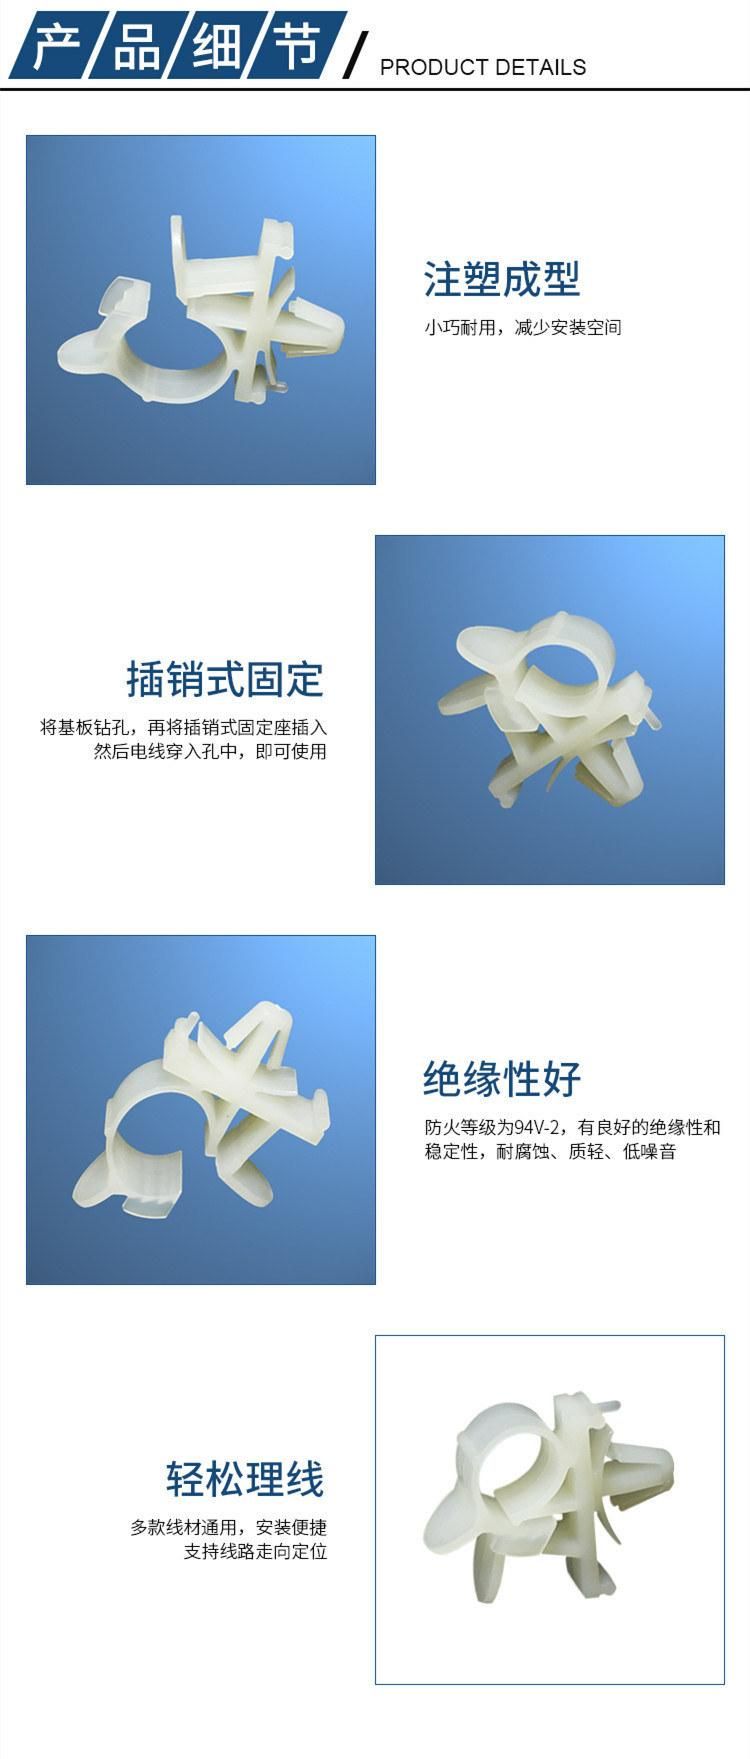 Cable Sticking Mount Bolt Type Fixing Buckle, Heyingcn Plastic Injection Clip Buckle Nylon Cable Clip